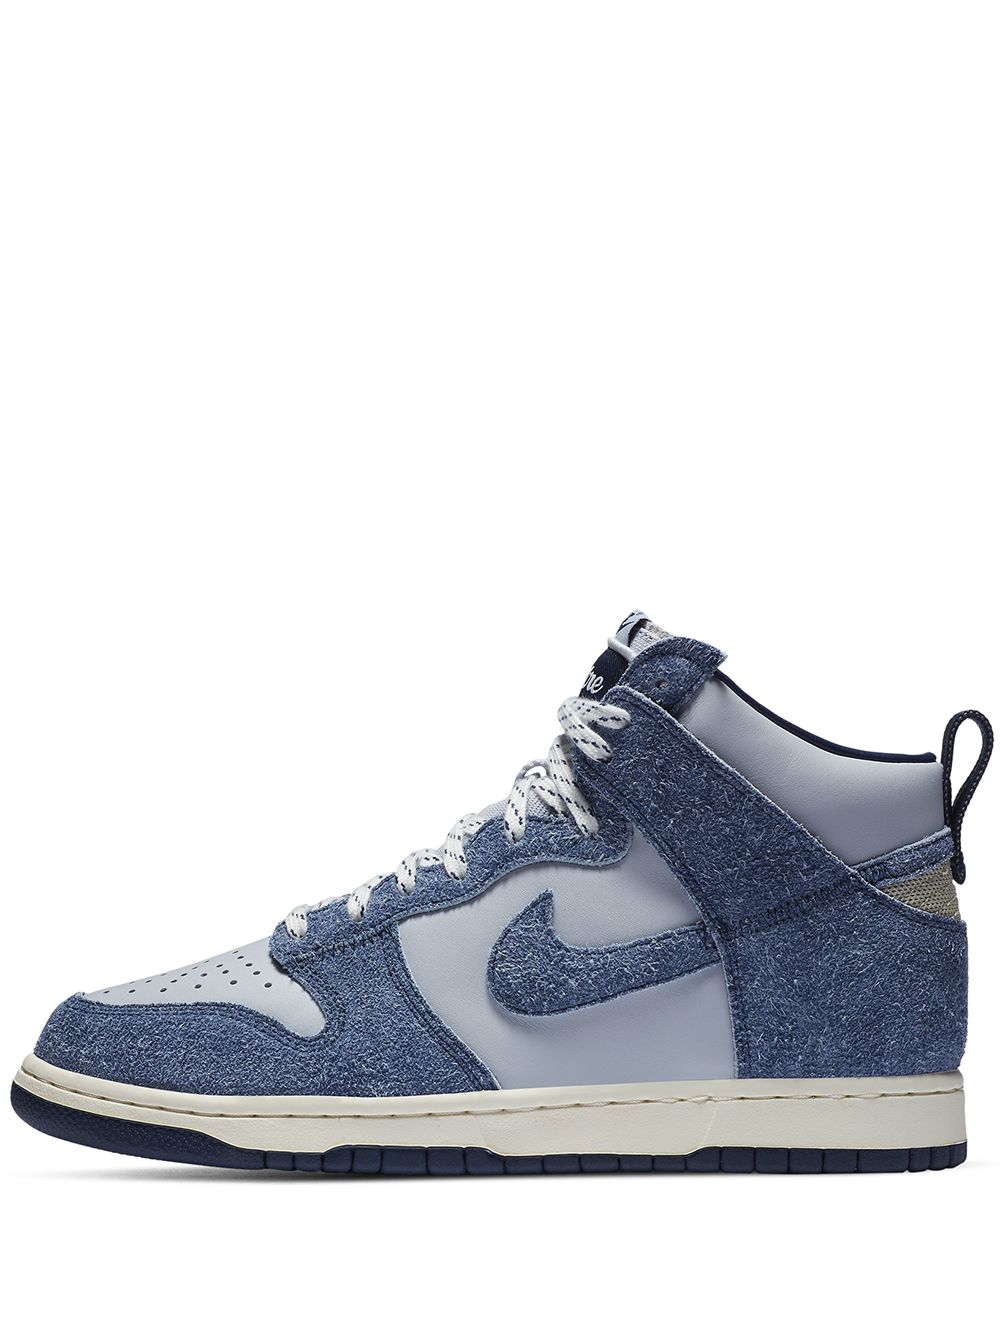 Nike Dunk High SP sneakers